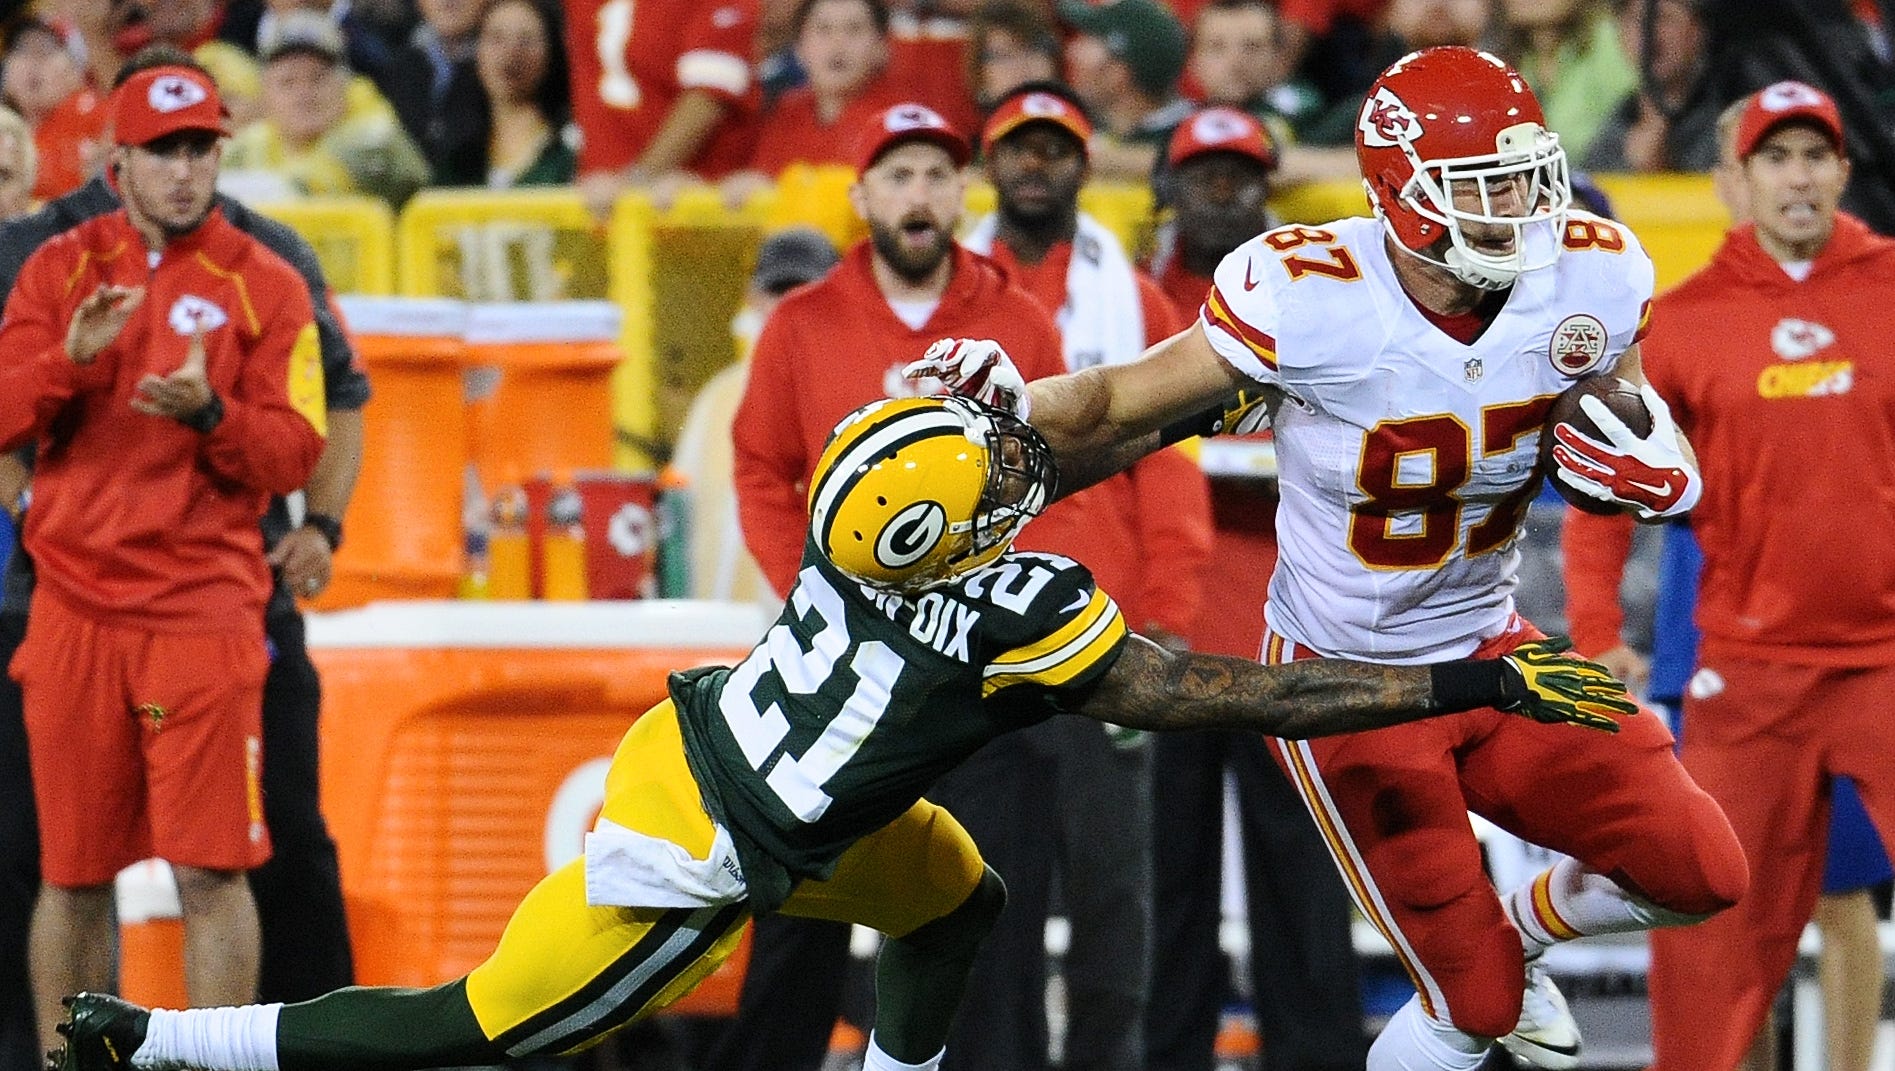 Kansas City Chiefs tight end Travis Kelce (87) stiff arms Green Bay Packers free safety Ha Ha Clinton-Dix (21) in the second quarter. The Green Bay Packers hosted the Kansas City Chiefs at Lambeau Field in Green Bay, Wis. on Monday, Sept. 28, 2015.